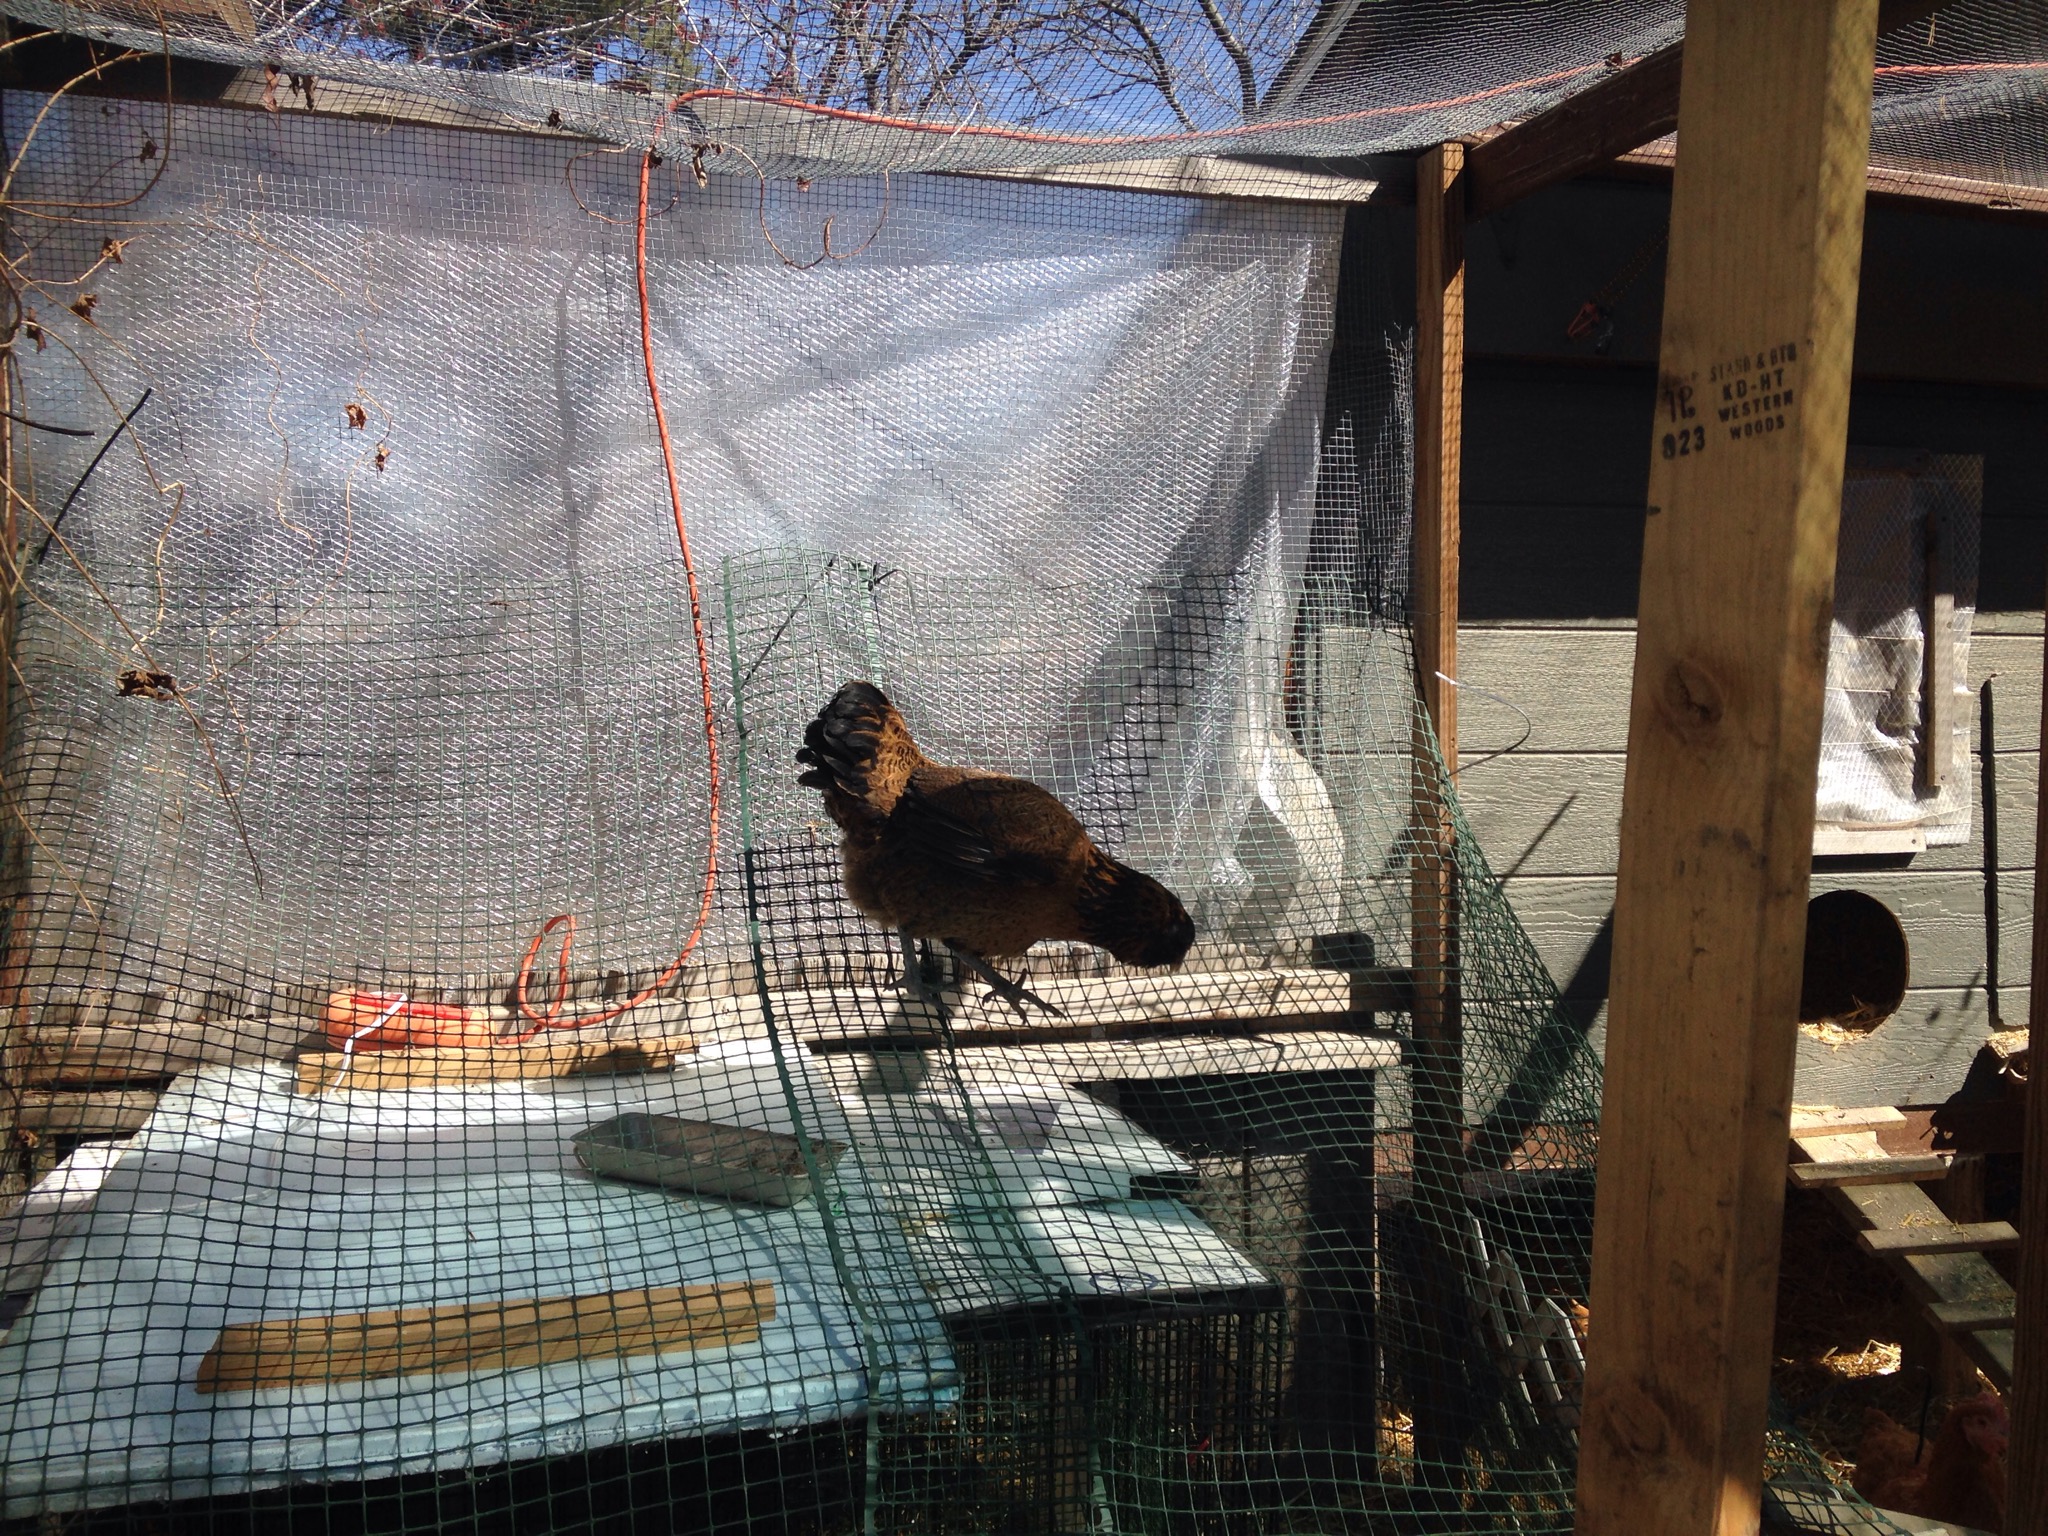 One of our hens trying to get in the brooder area...